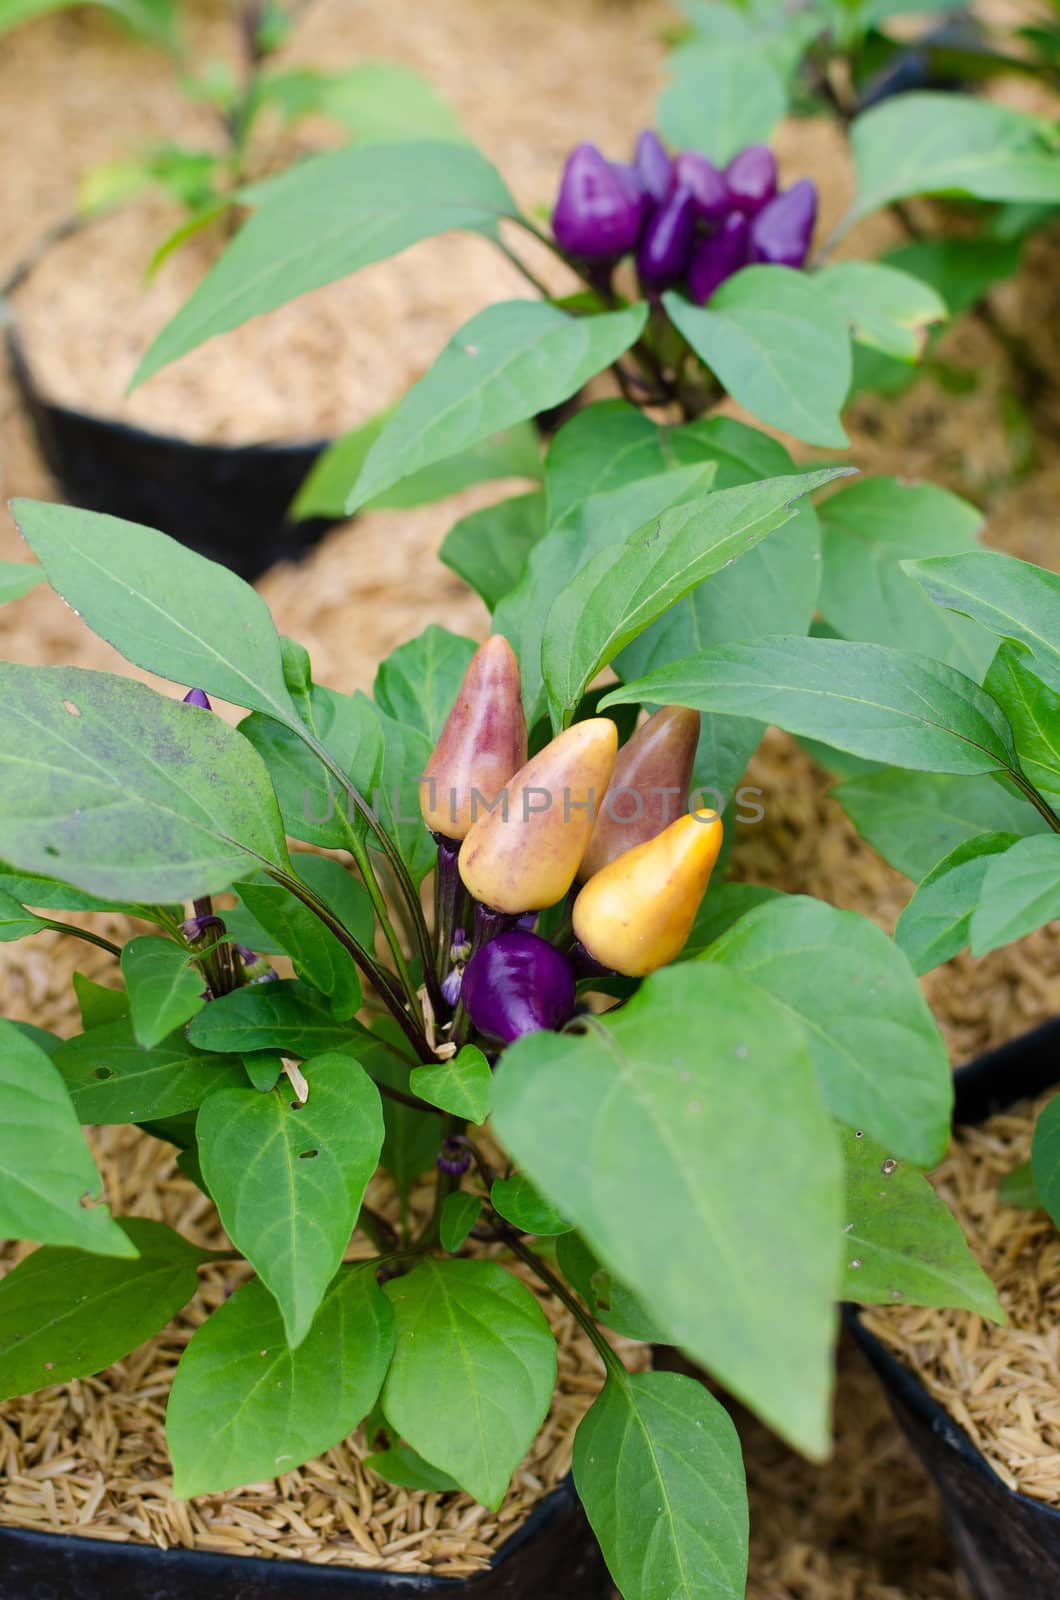 Chili with small purple  for ornamental gardens. , Have another name called Bolivian Rainbow Chili.